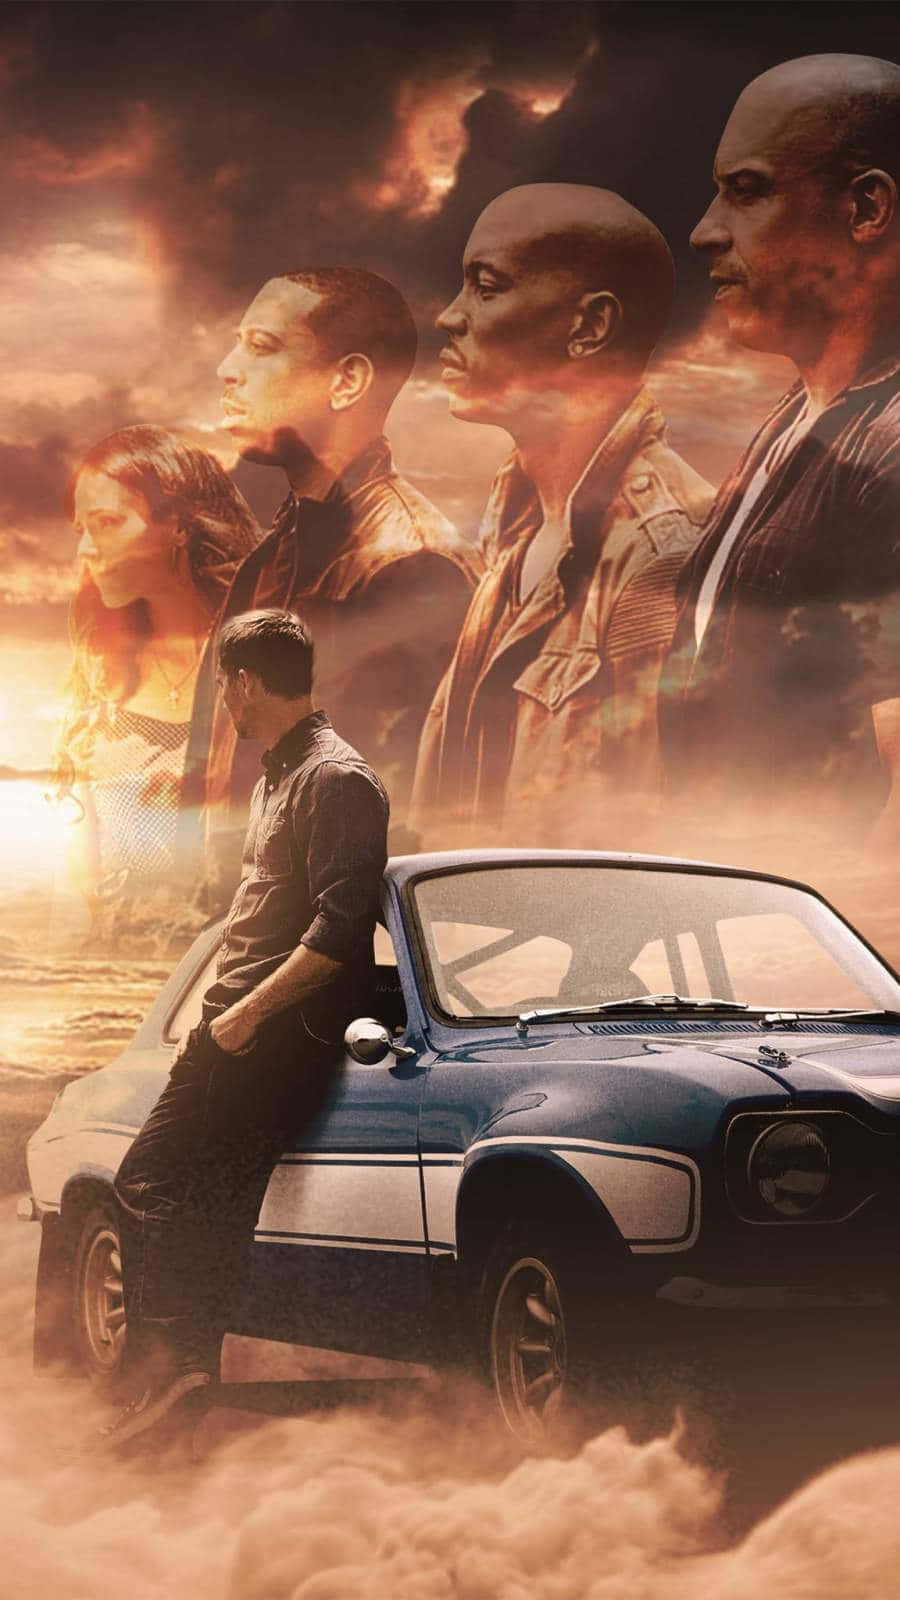 The Fast And The Furious - Tv Series Poster Wallpaper